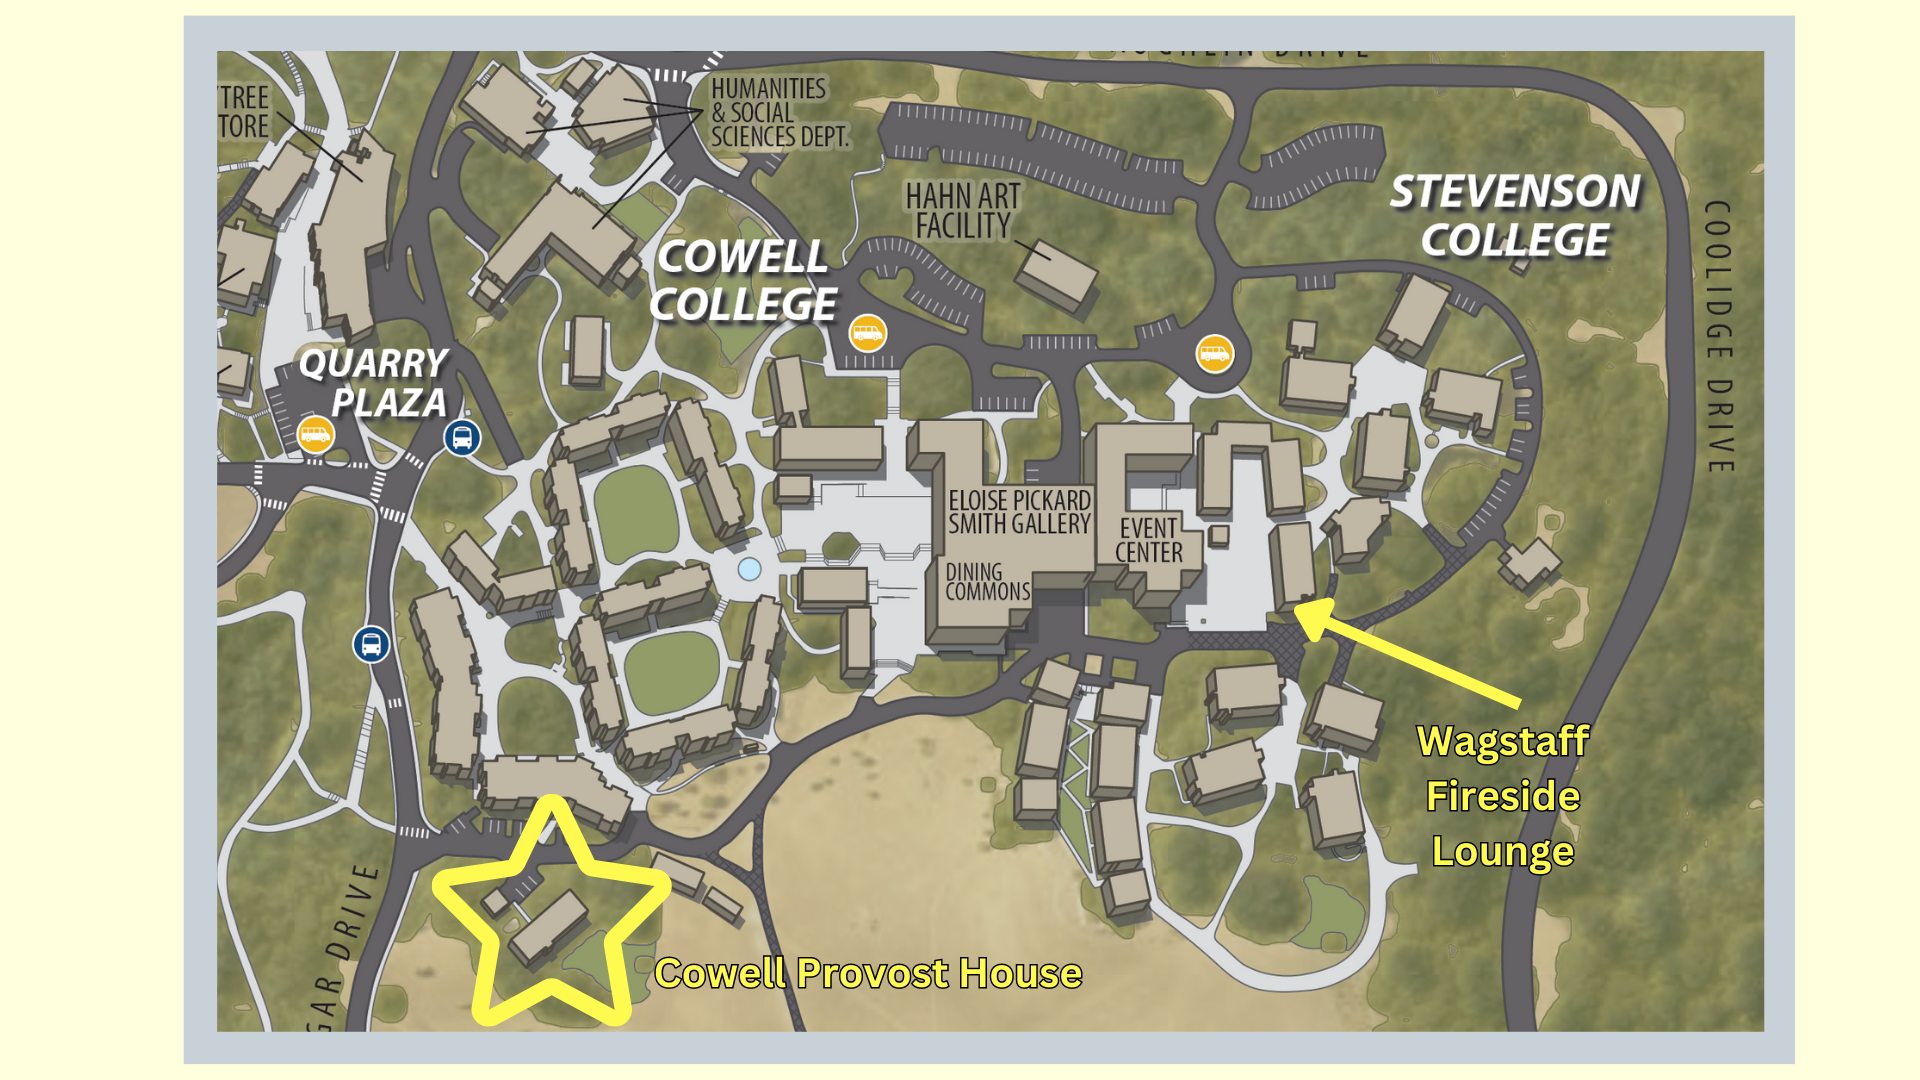 A map of Cowell College and Stevenson College